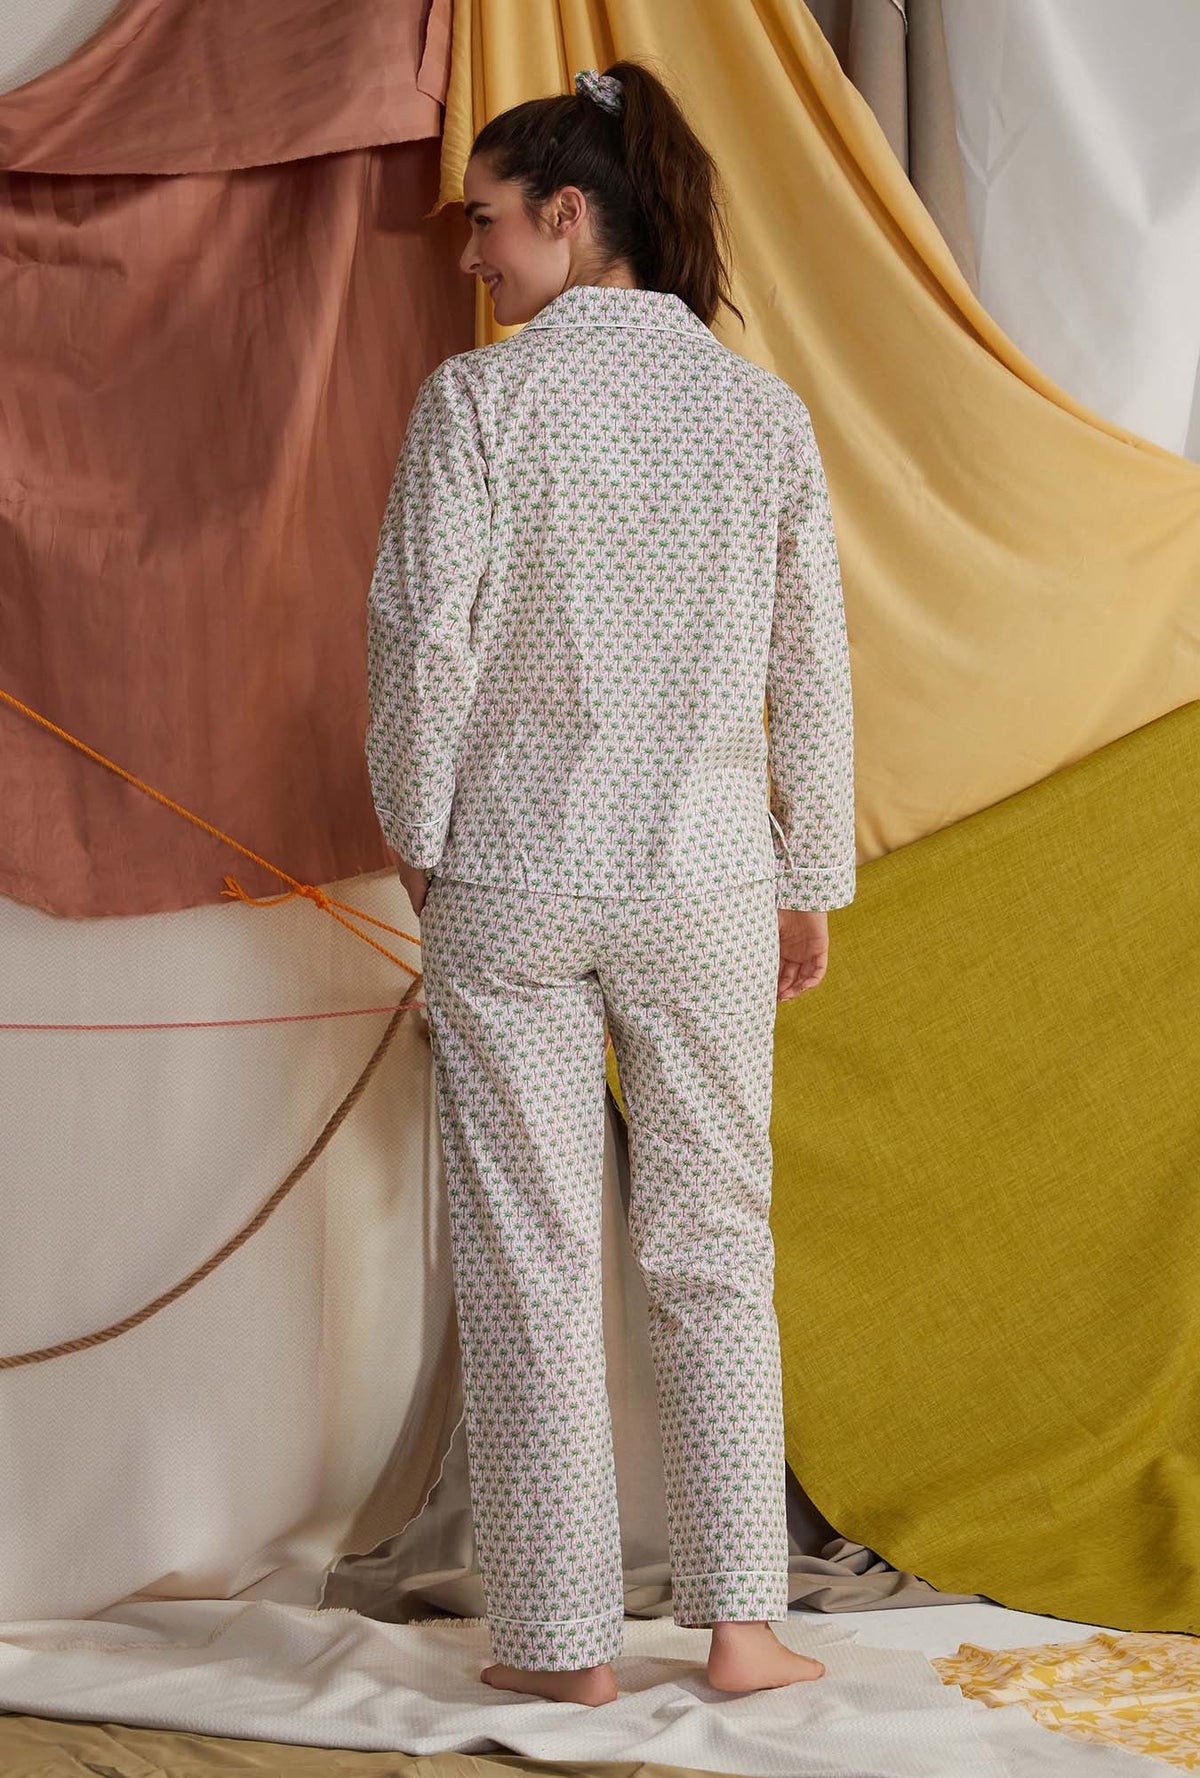 A lady wearing multicolor long sleeve clasic woven cotton poplin pj set with palm geo print.